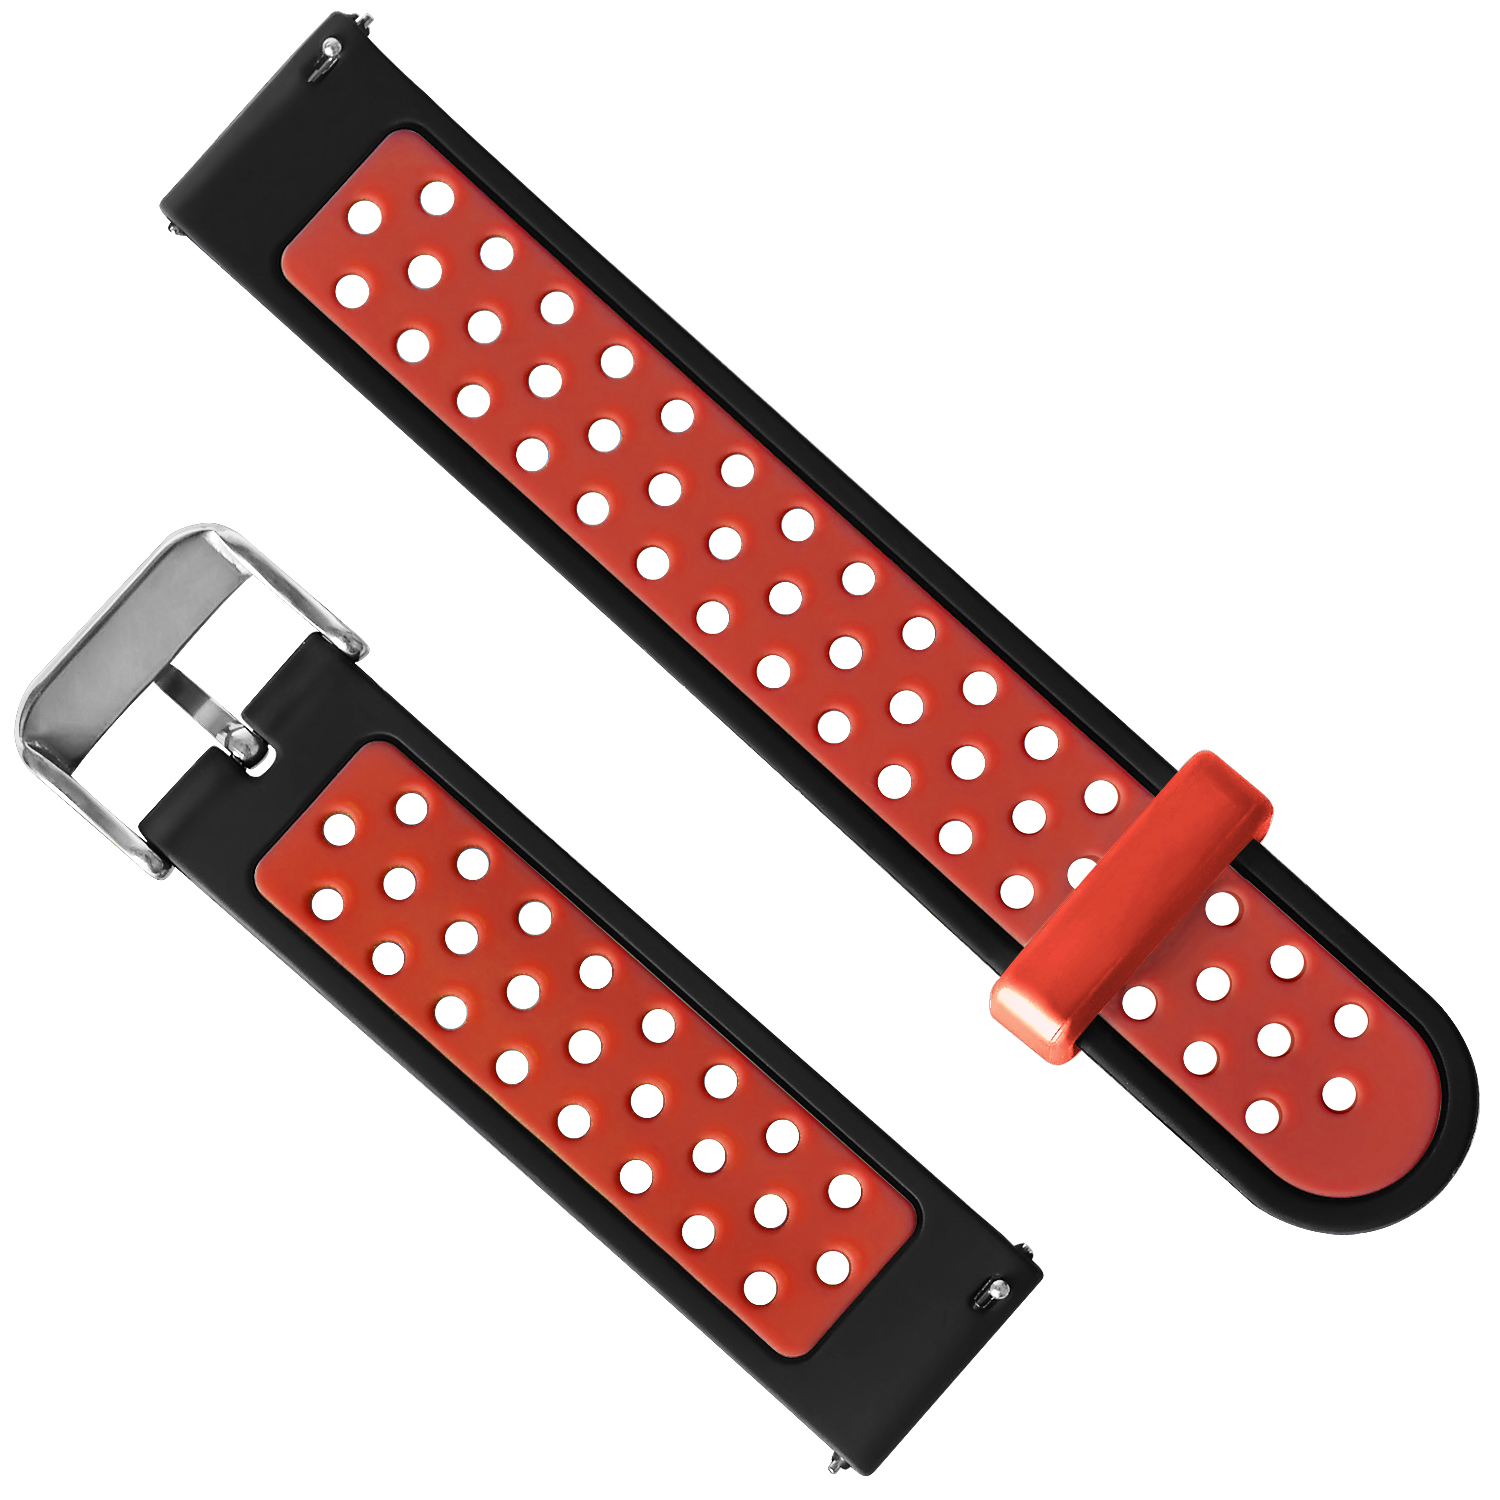 Bakeey-Silicone-Watch-Band-Replacement-Watch-Strap-for-Amazfit-GTS-Smart-Watch-1567973-4